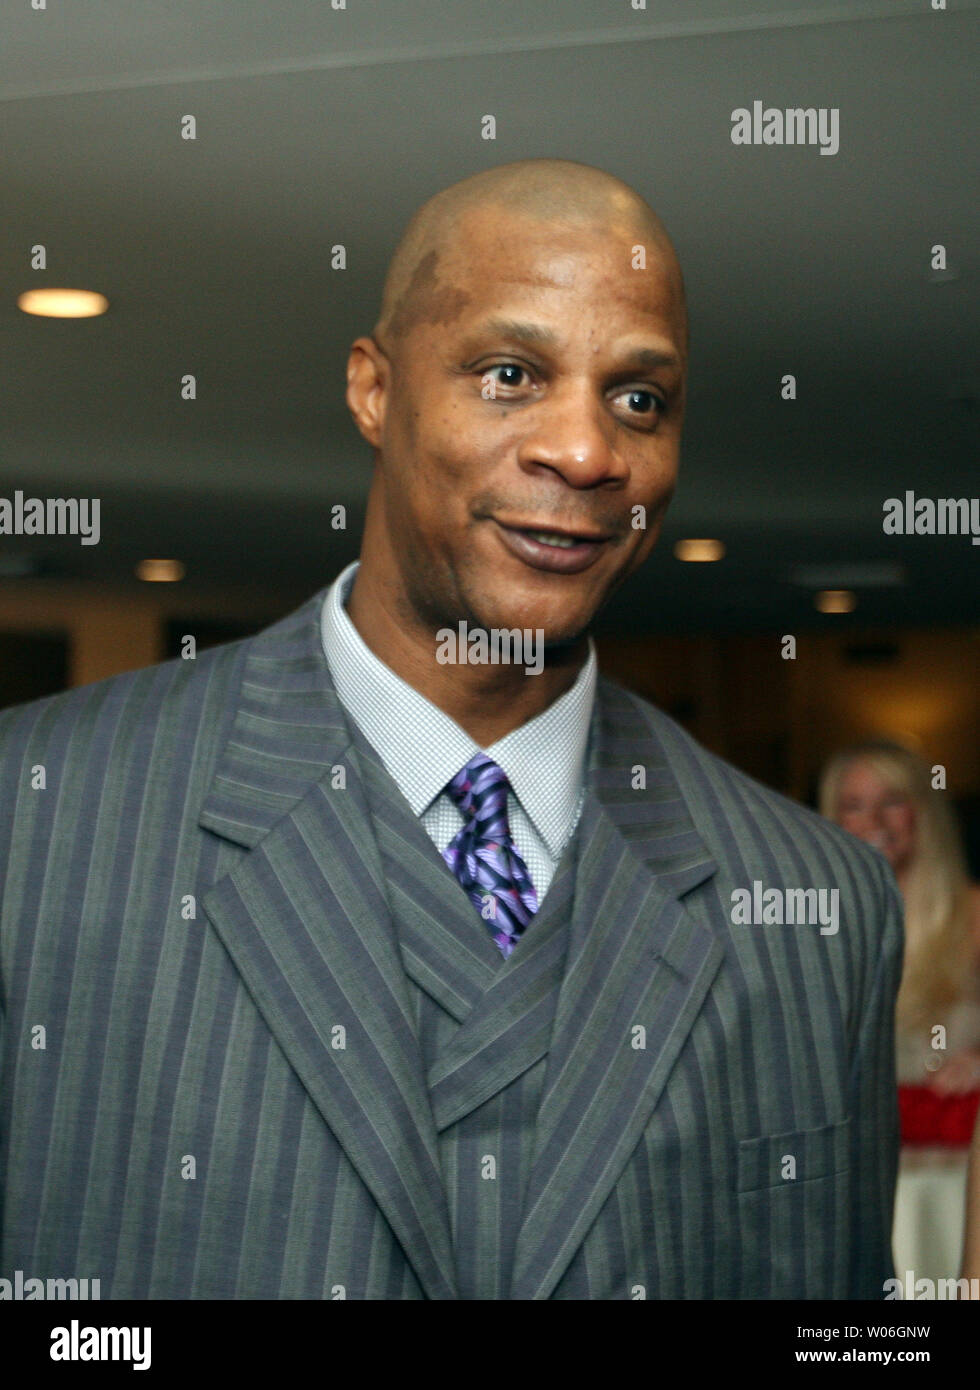 Former New York Mets slugger Darryl Strawberry makes an appearence at the  Annual Pujols Family Foundation Holiday Party at the Chase Park Plaza Hotel  in St. Louis on December 7, 2008. The